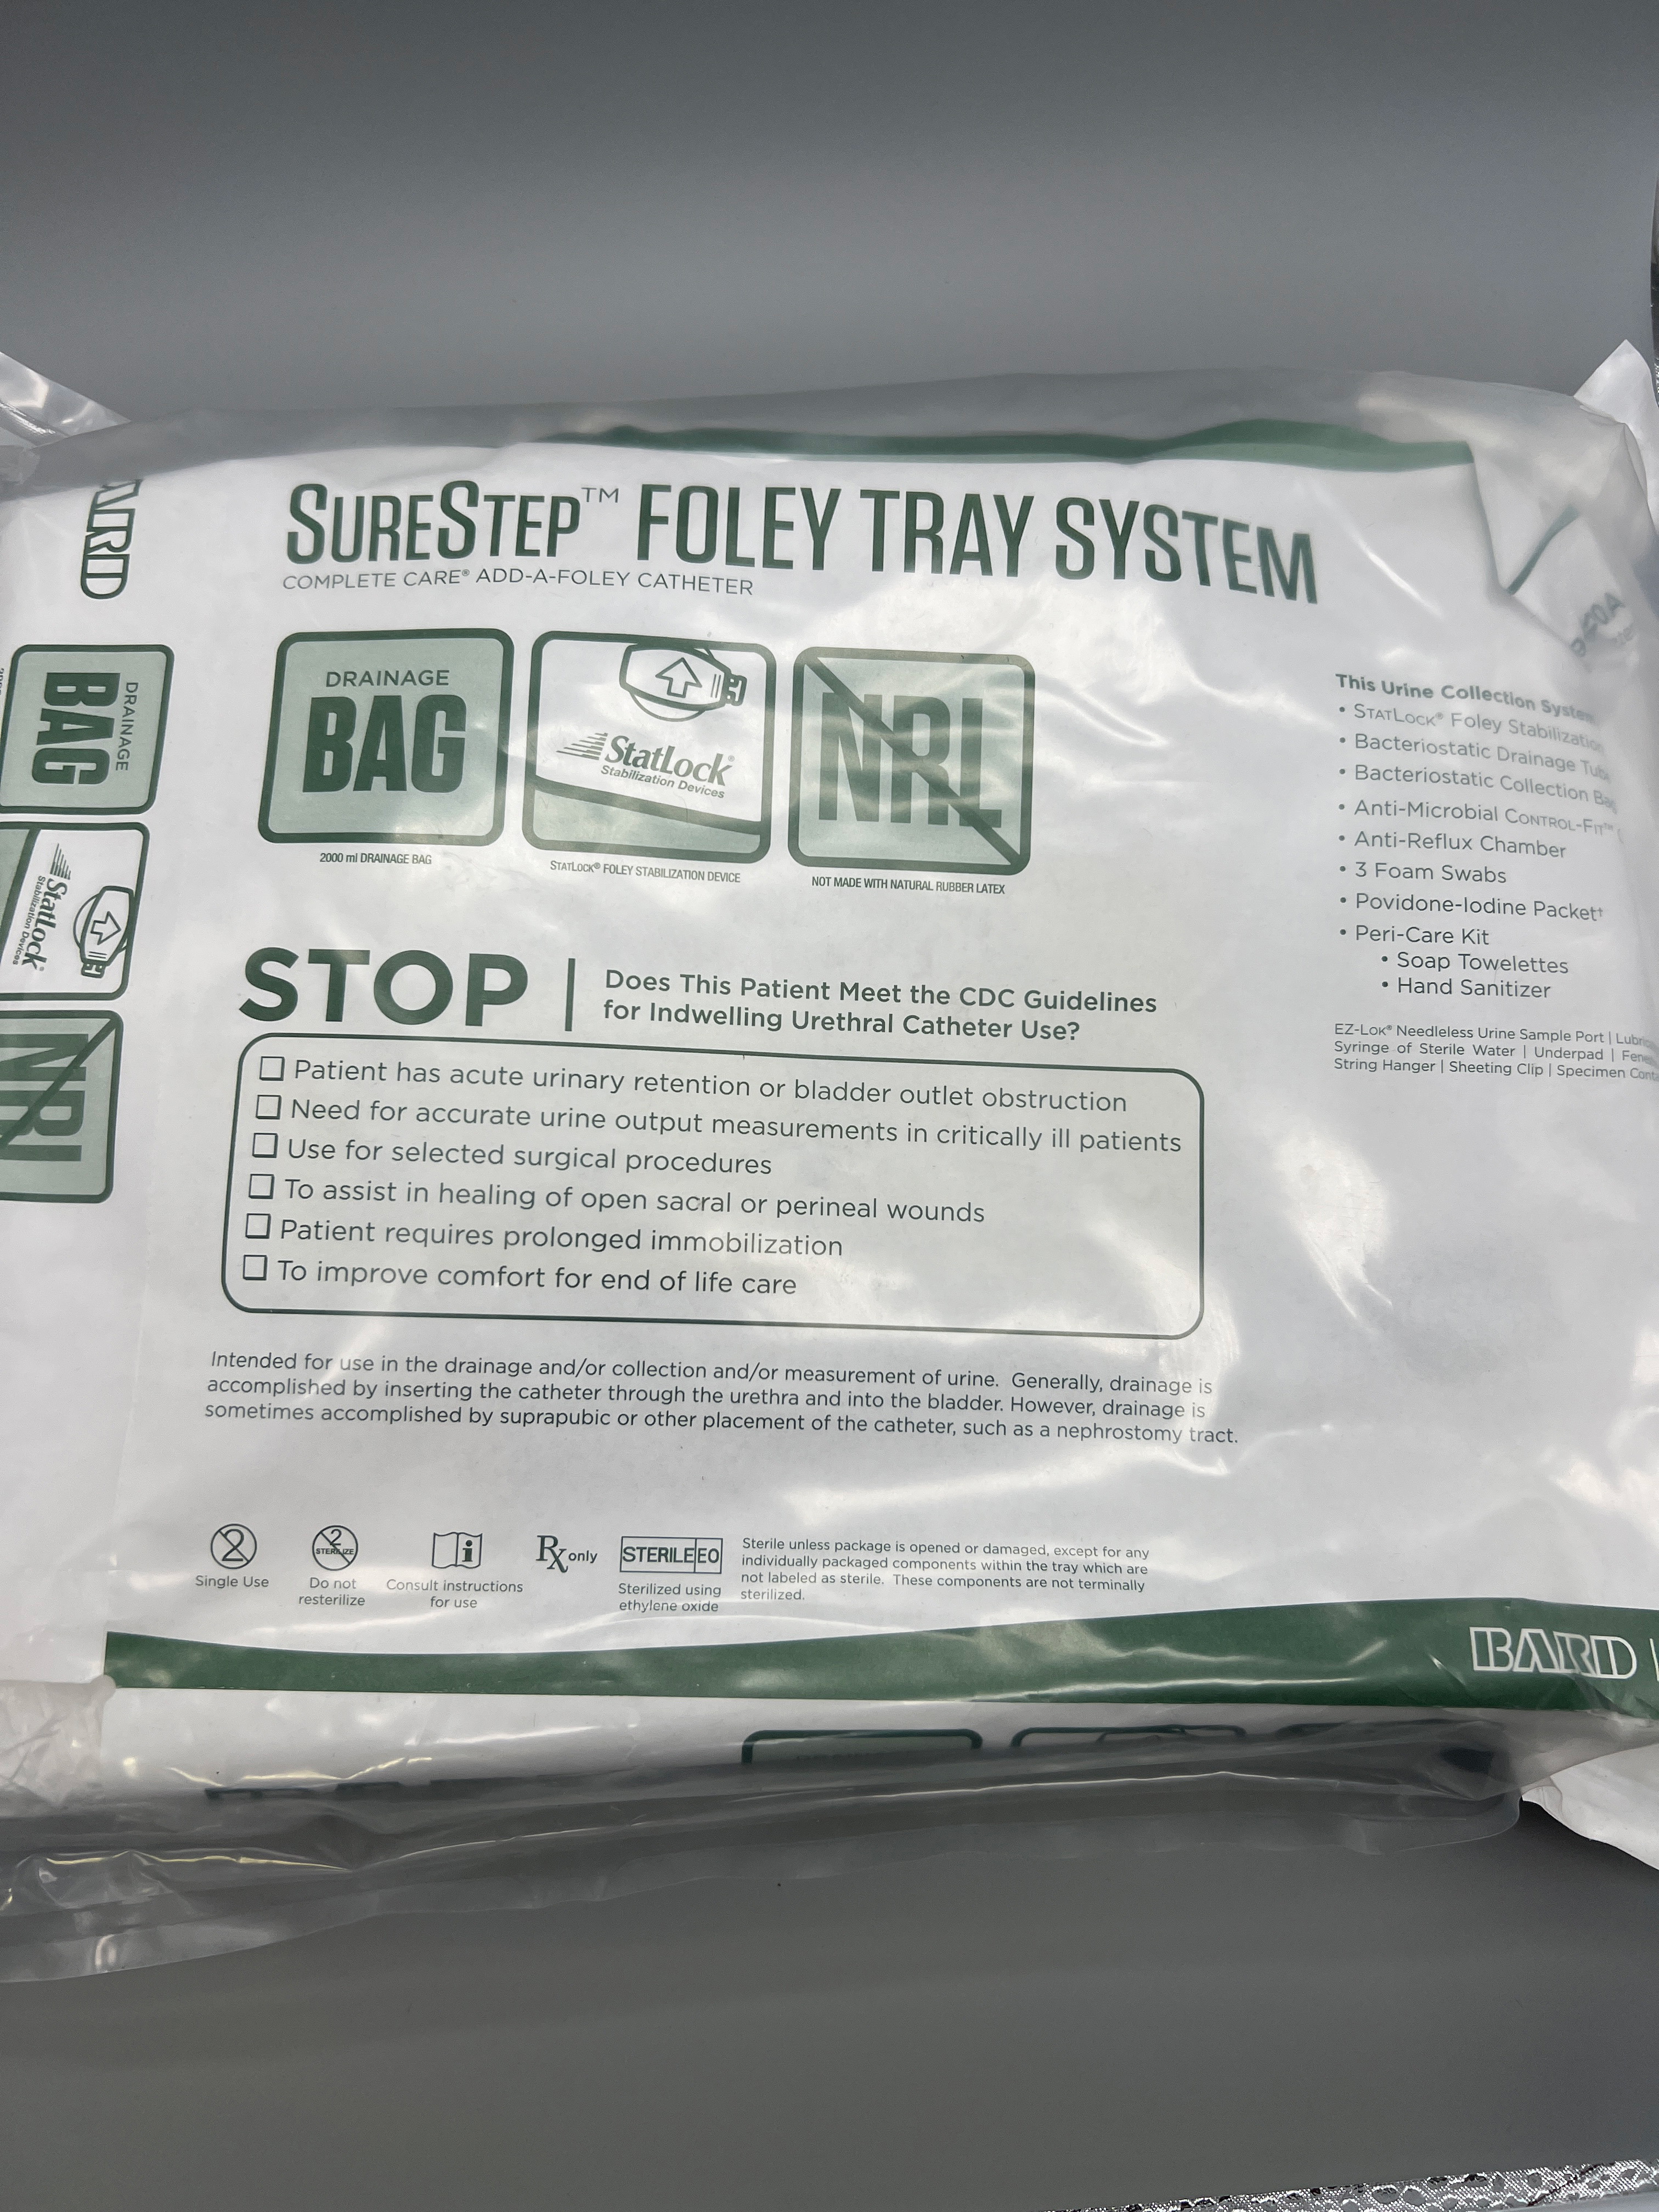 SURESTEP FOLEY TRAY SYSTEM COMPLETE CARE ADD - A FOLEY CATHETER